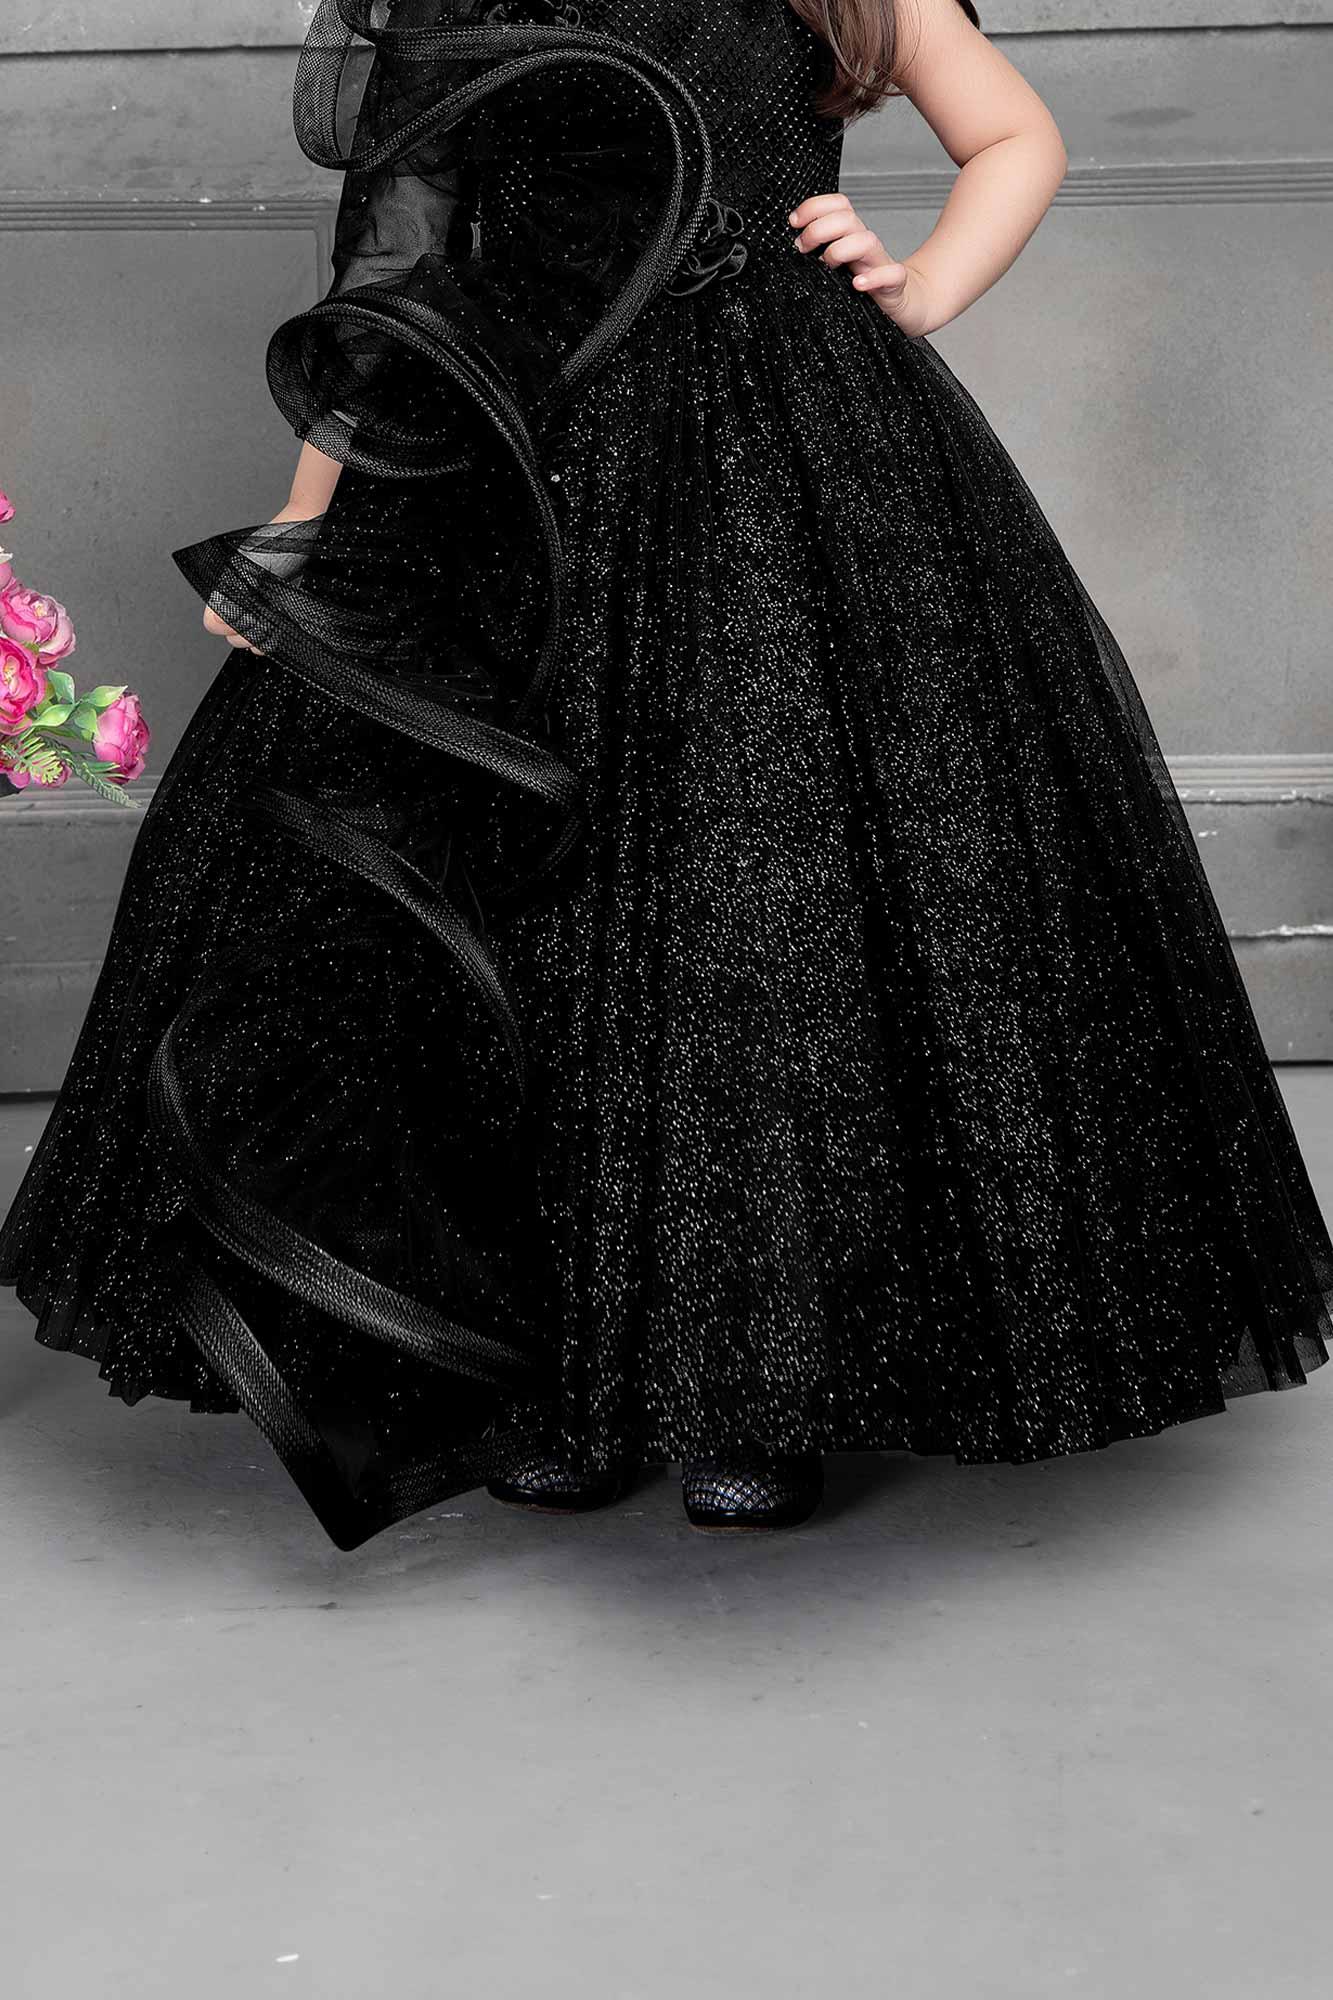 Gorgeous black gown | Princess ball gowns, Bridal dresses, Gowns